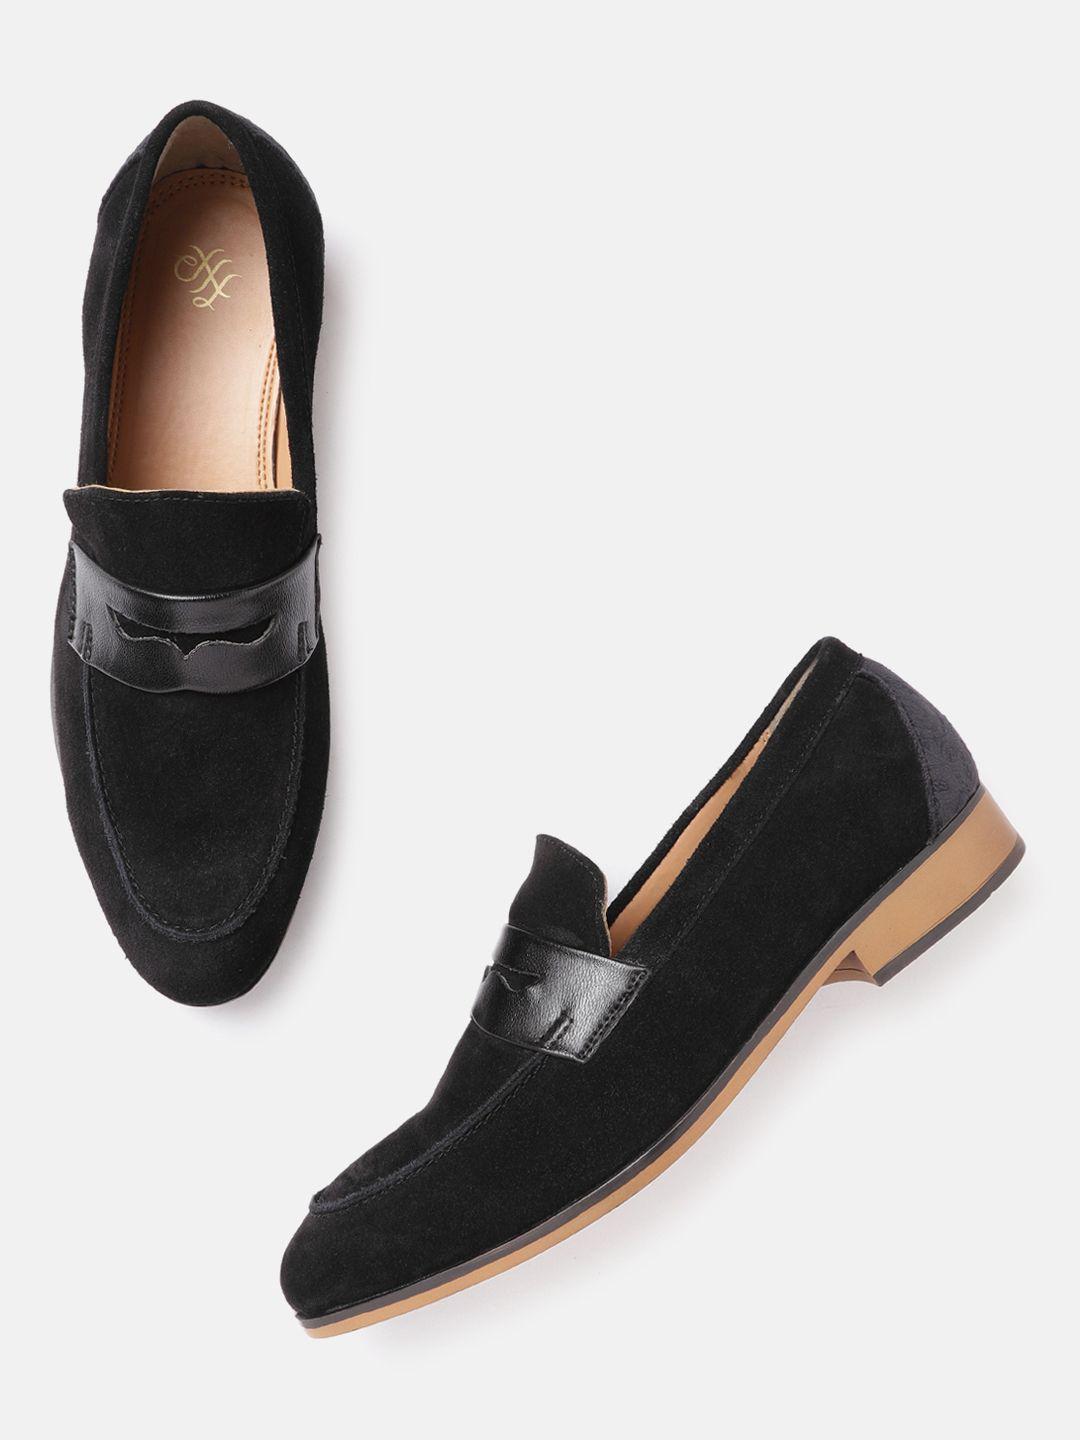 house of pataudi men black handcrafted suede partywear penny loafers